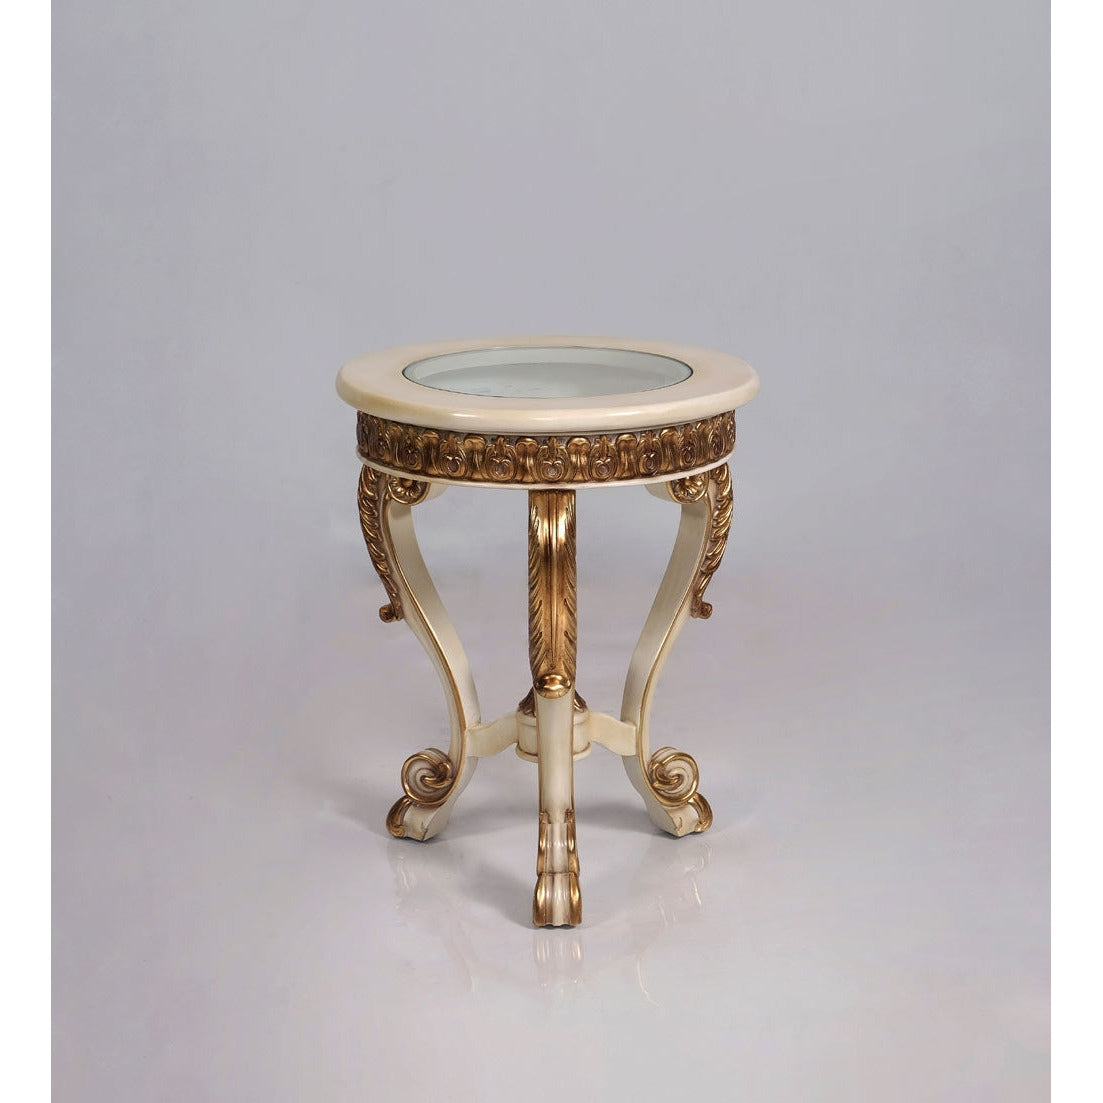 European Furniture - Veronica 3 Piece Luxury Occasional Table Set in Antique Beige and Antique Dark Gold leaf - 47075-CT-ET - New Star Living